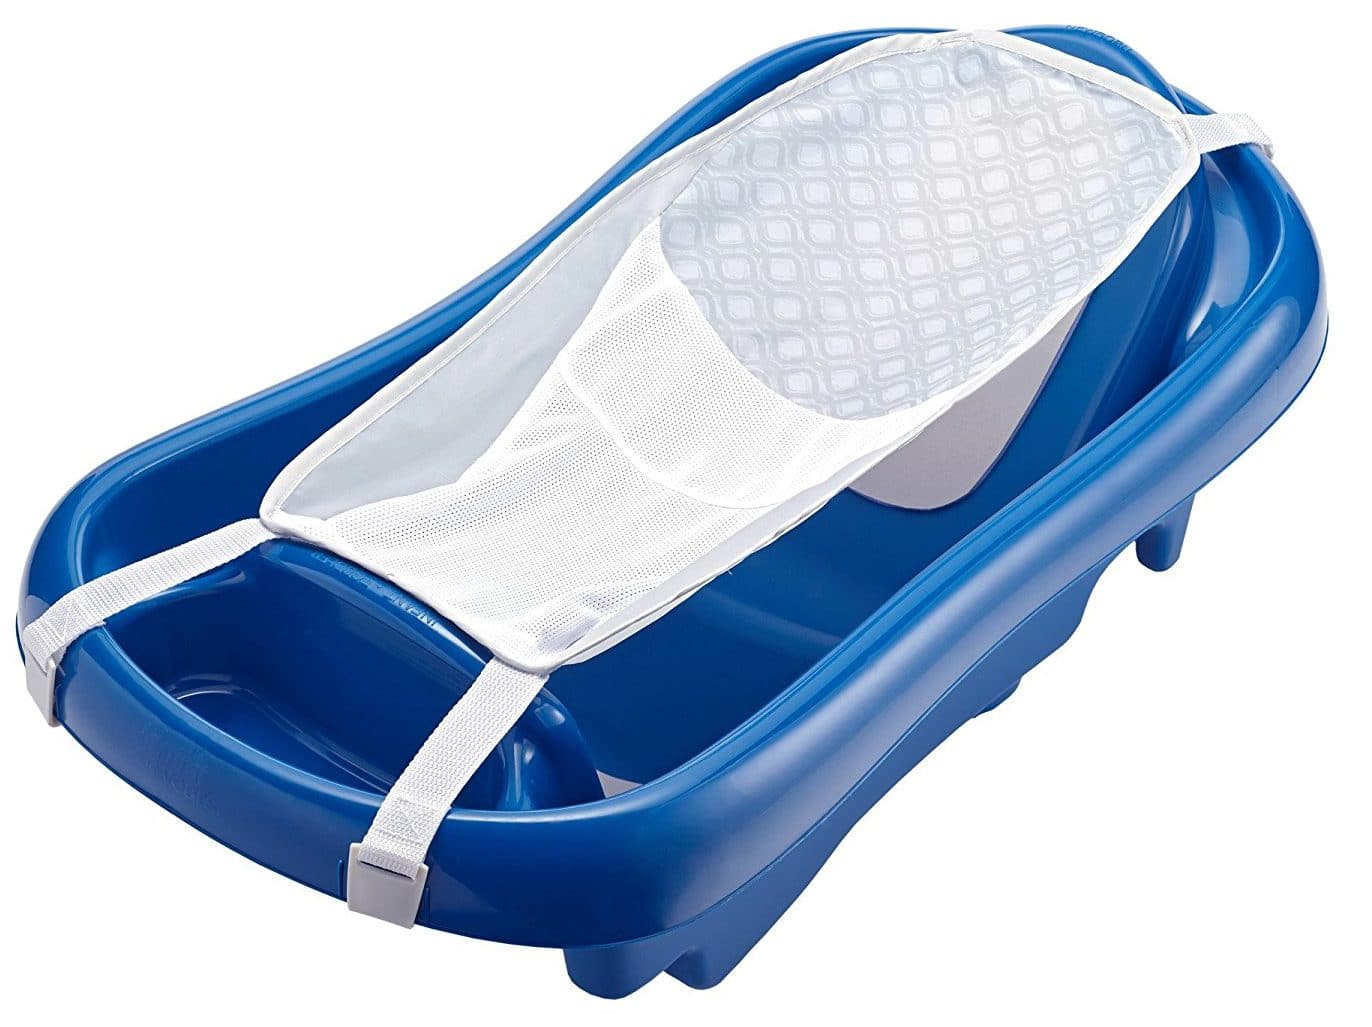 The First Years Sure Comfort Deluxe Newborn Toddler Tub